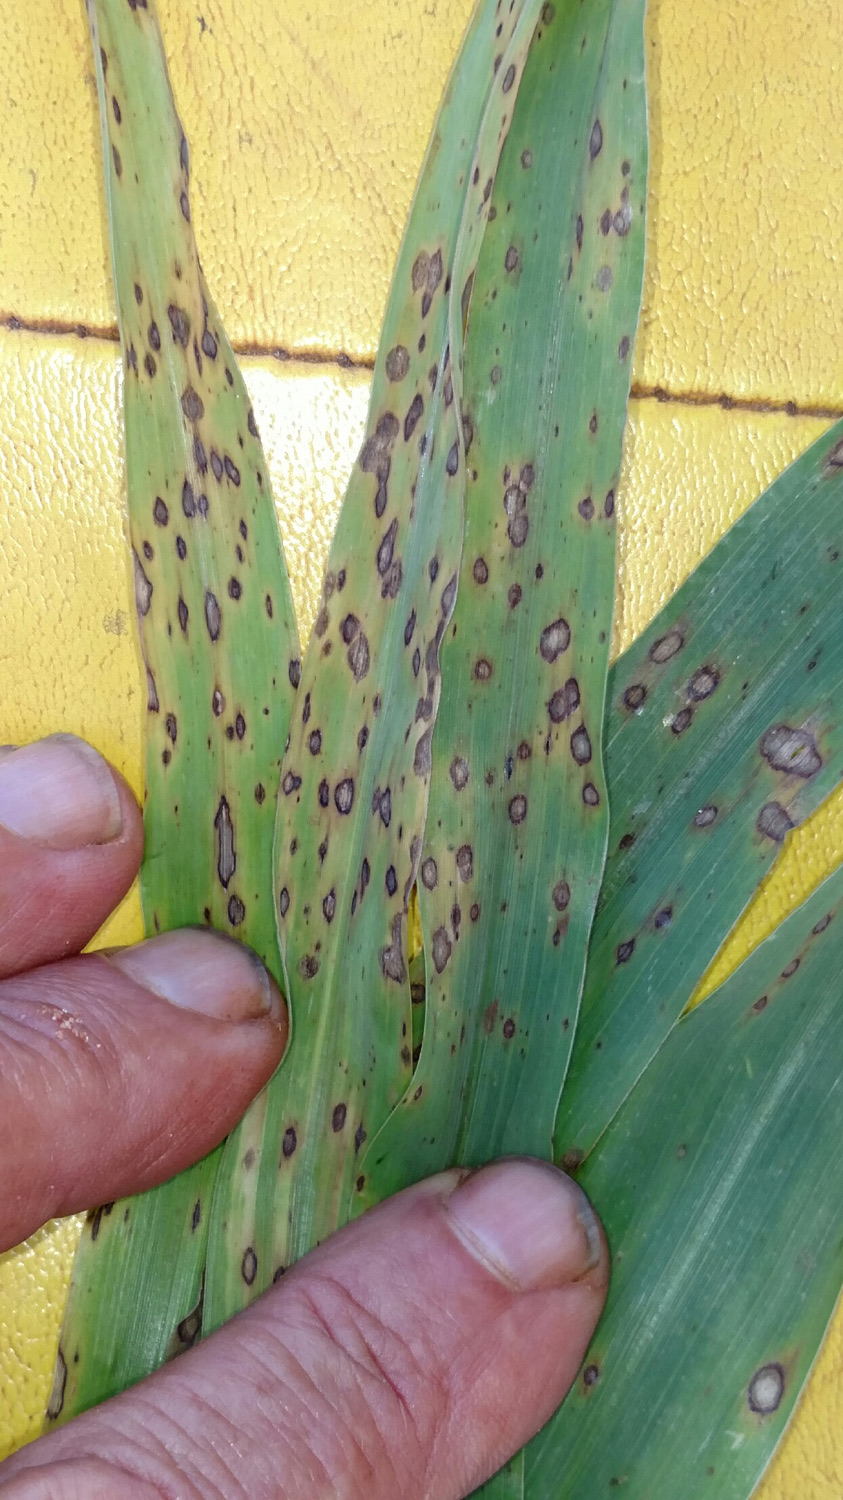 sorghum leaves mostly covered in large spots with gray centers and thick reddish brown margins